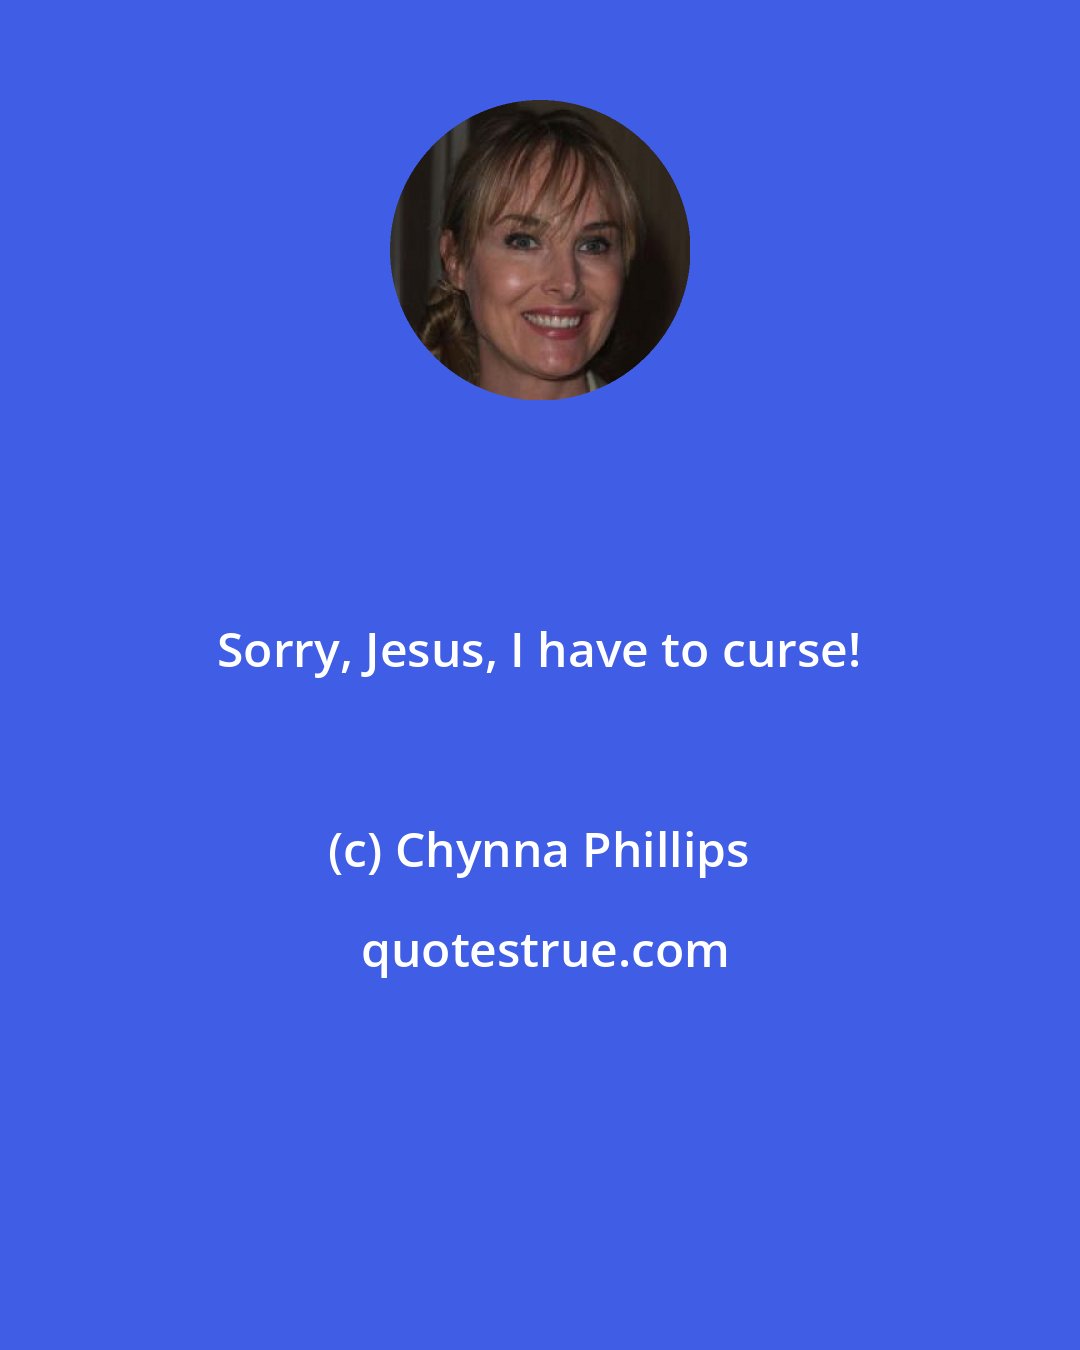 Chynna Phillips: Sorry, Jesus, I have to curse!